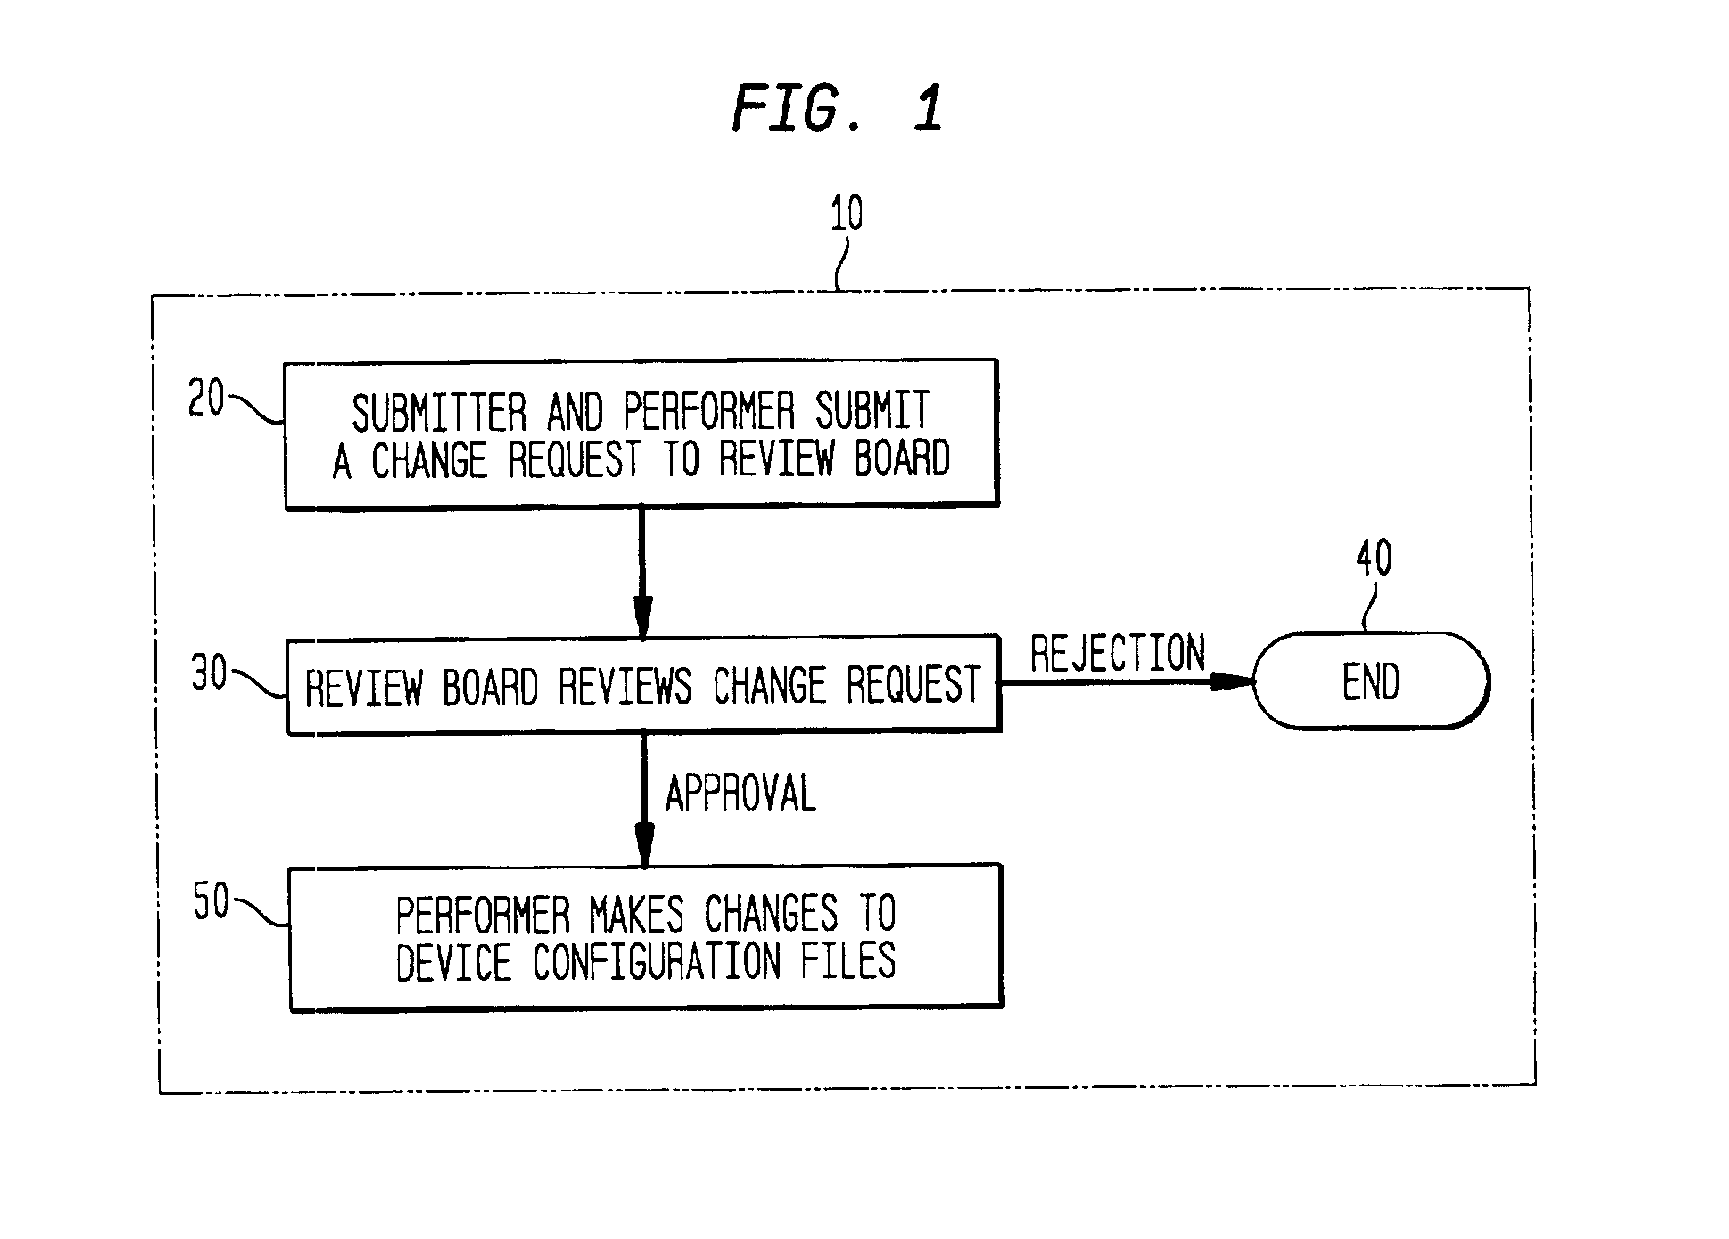 Method and apparatus for authorizing and reporting changes to device configurations